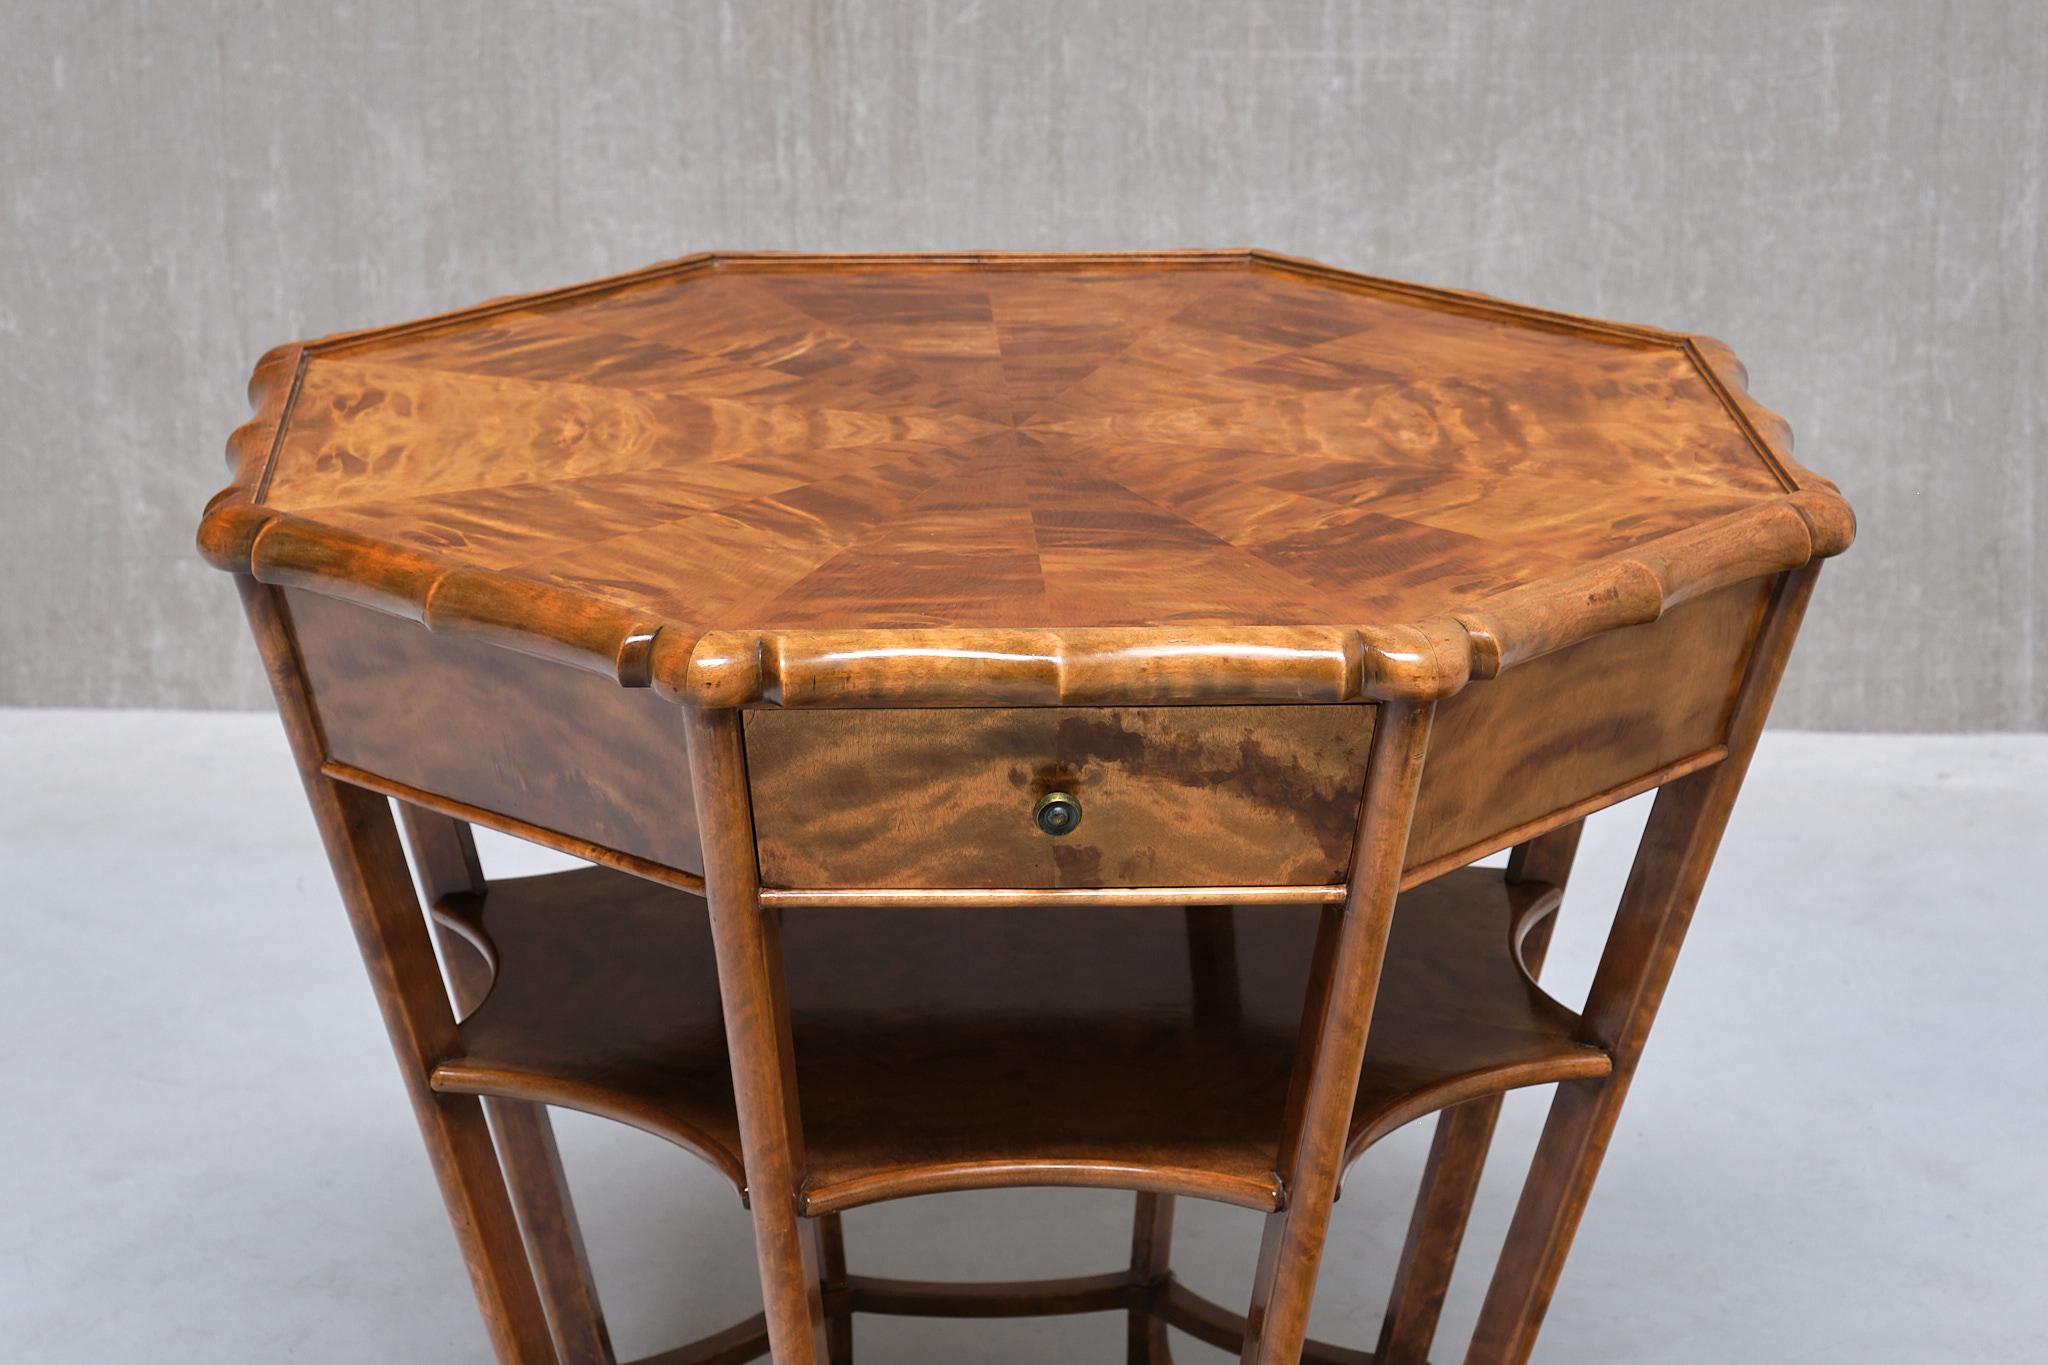 Exceptional Expressionist Octagonal Center Table in Flamed Birch, Germany, 1920s For Sale 7